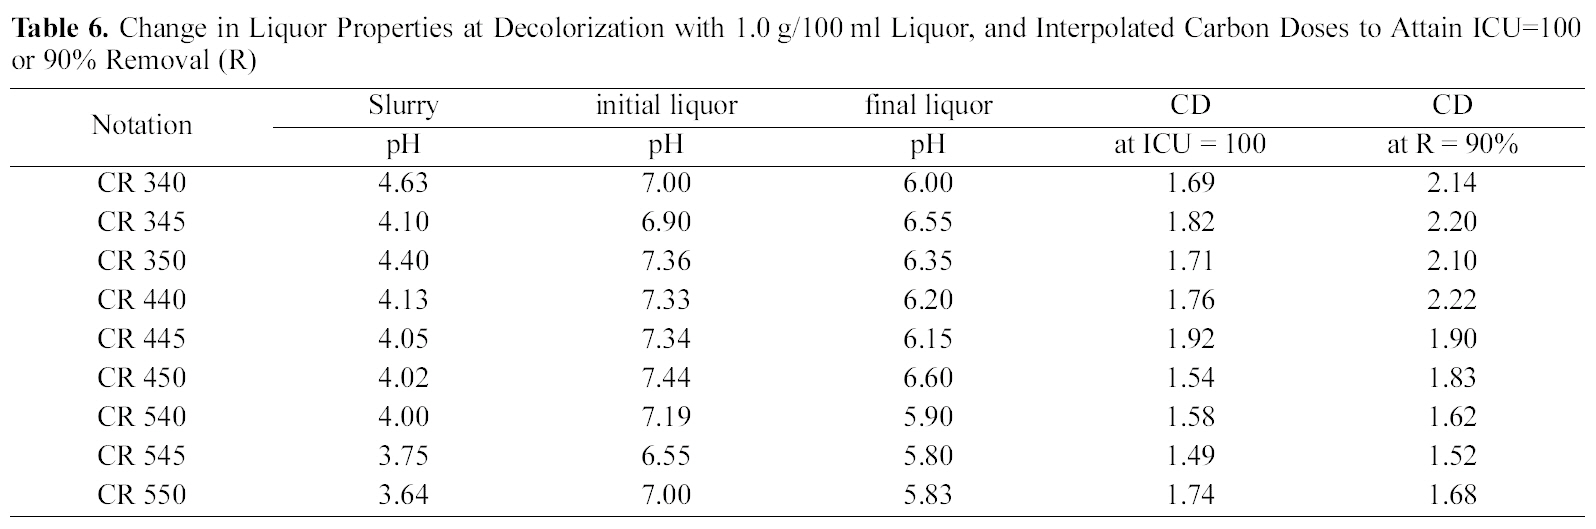 Change in Liquor Properties at Decolorization with 1.0 g/100 ml Liquor and Interpolated Carbon Doses to Attain ICU=100 or 90% Removal (R)